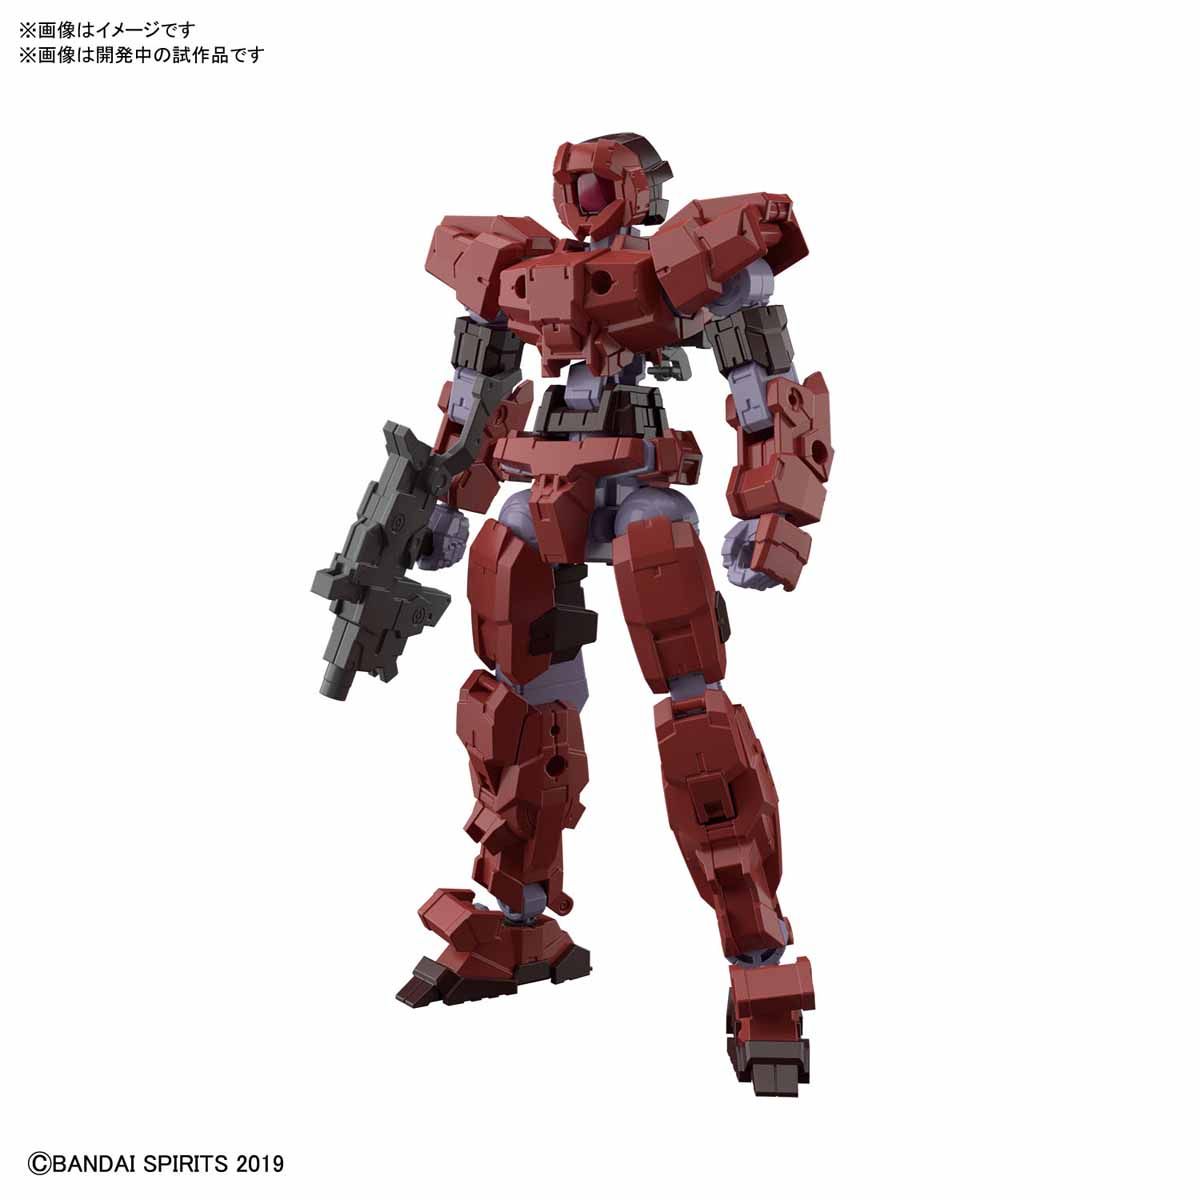 Bas5058098 30 Mm No.07 Eemx-17 Alto Red Model Kit From 30 Minute Mission